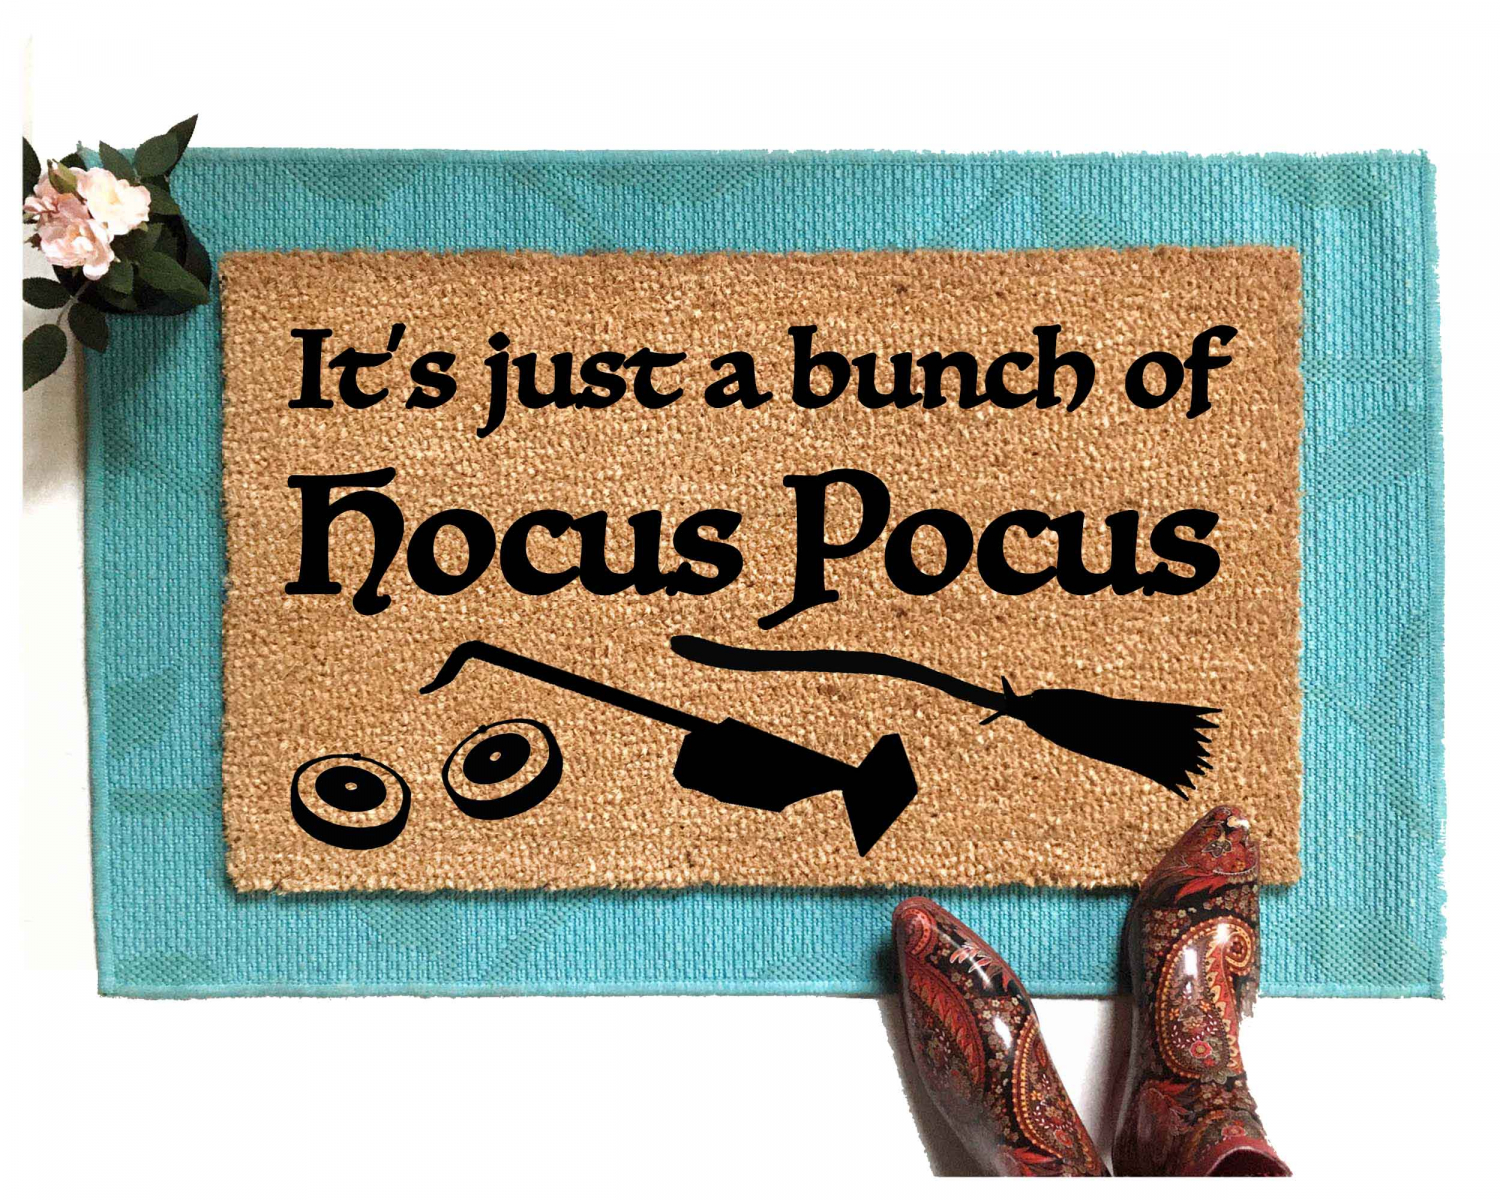 JUST A BUNCH OF HOCUS POCUS FUNNY HALLOWEEN DOORMAT pictured on blue layering rug with pumpkins and cute white shoes